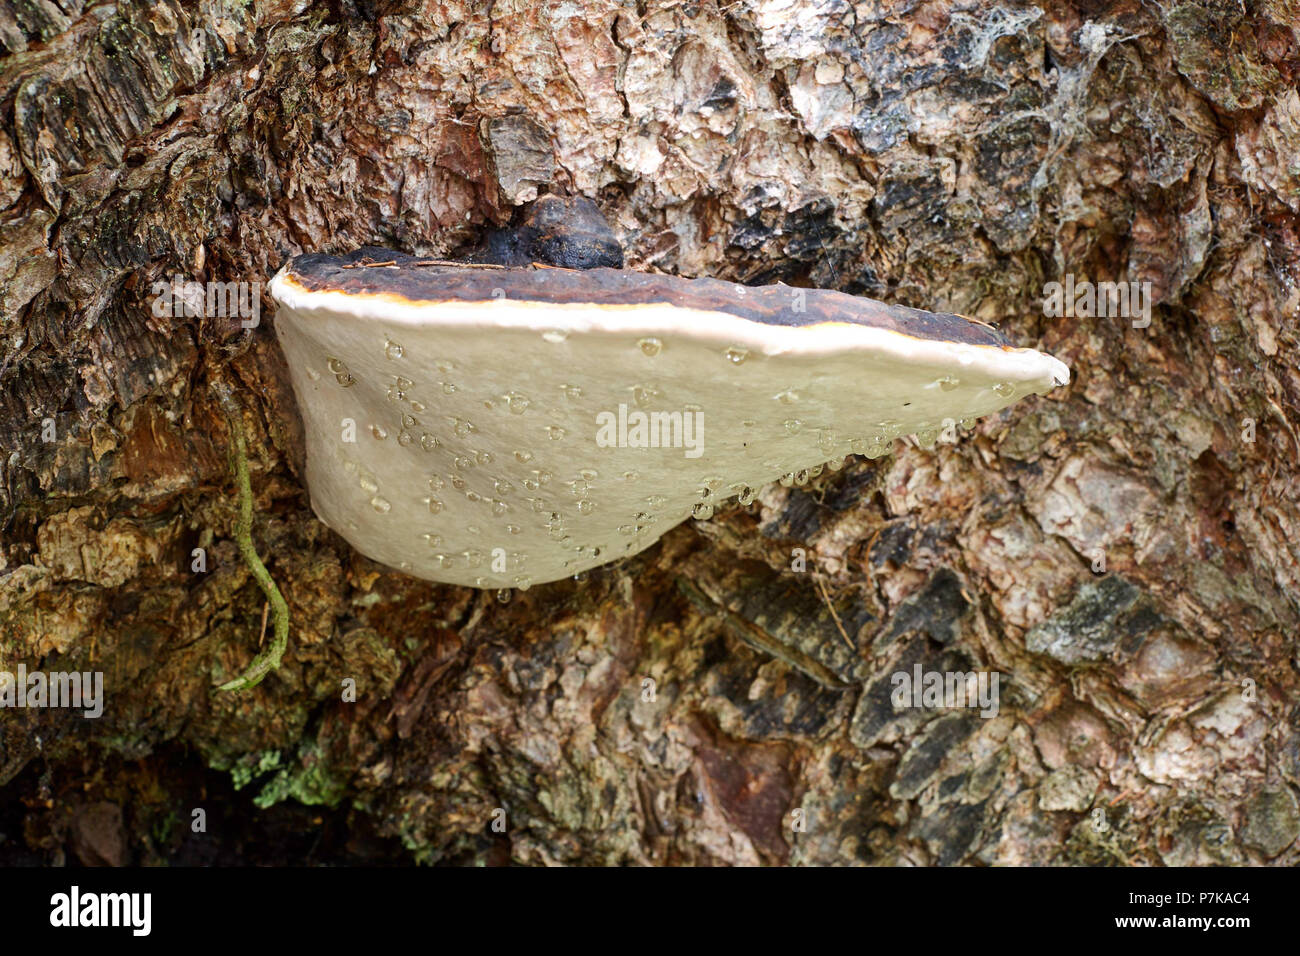 Tree fungus growing on old trunk with water drops Stock Photo